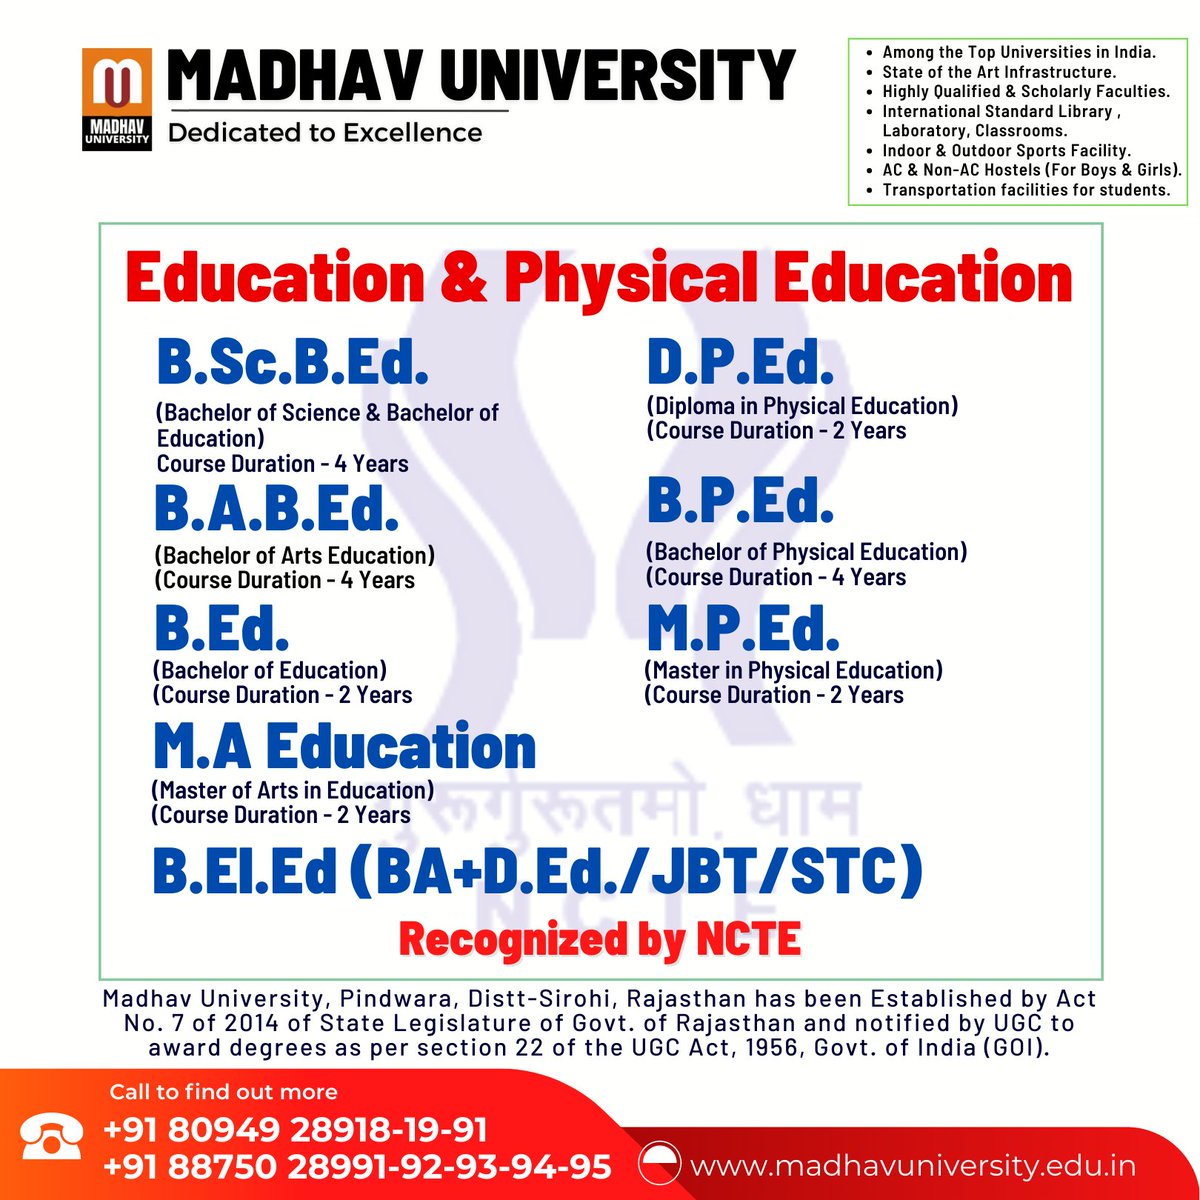 Empower minds and bodies through Education & Physical Education. Foster intellectual growth and promote active lifestyles for a healthier and brighter future. 📚🏃‍♀️ 
#EducationAndPhysicalEducation #IntellectualGrowth #ActiveLifestyle #DilSeMU #madhavuniversity #university…